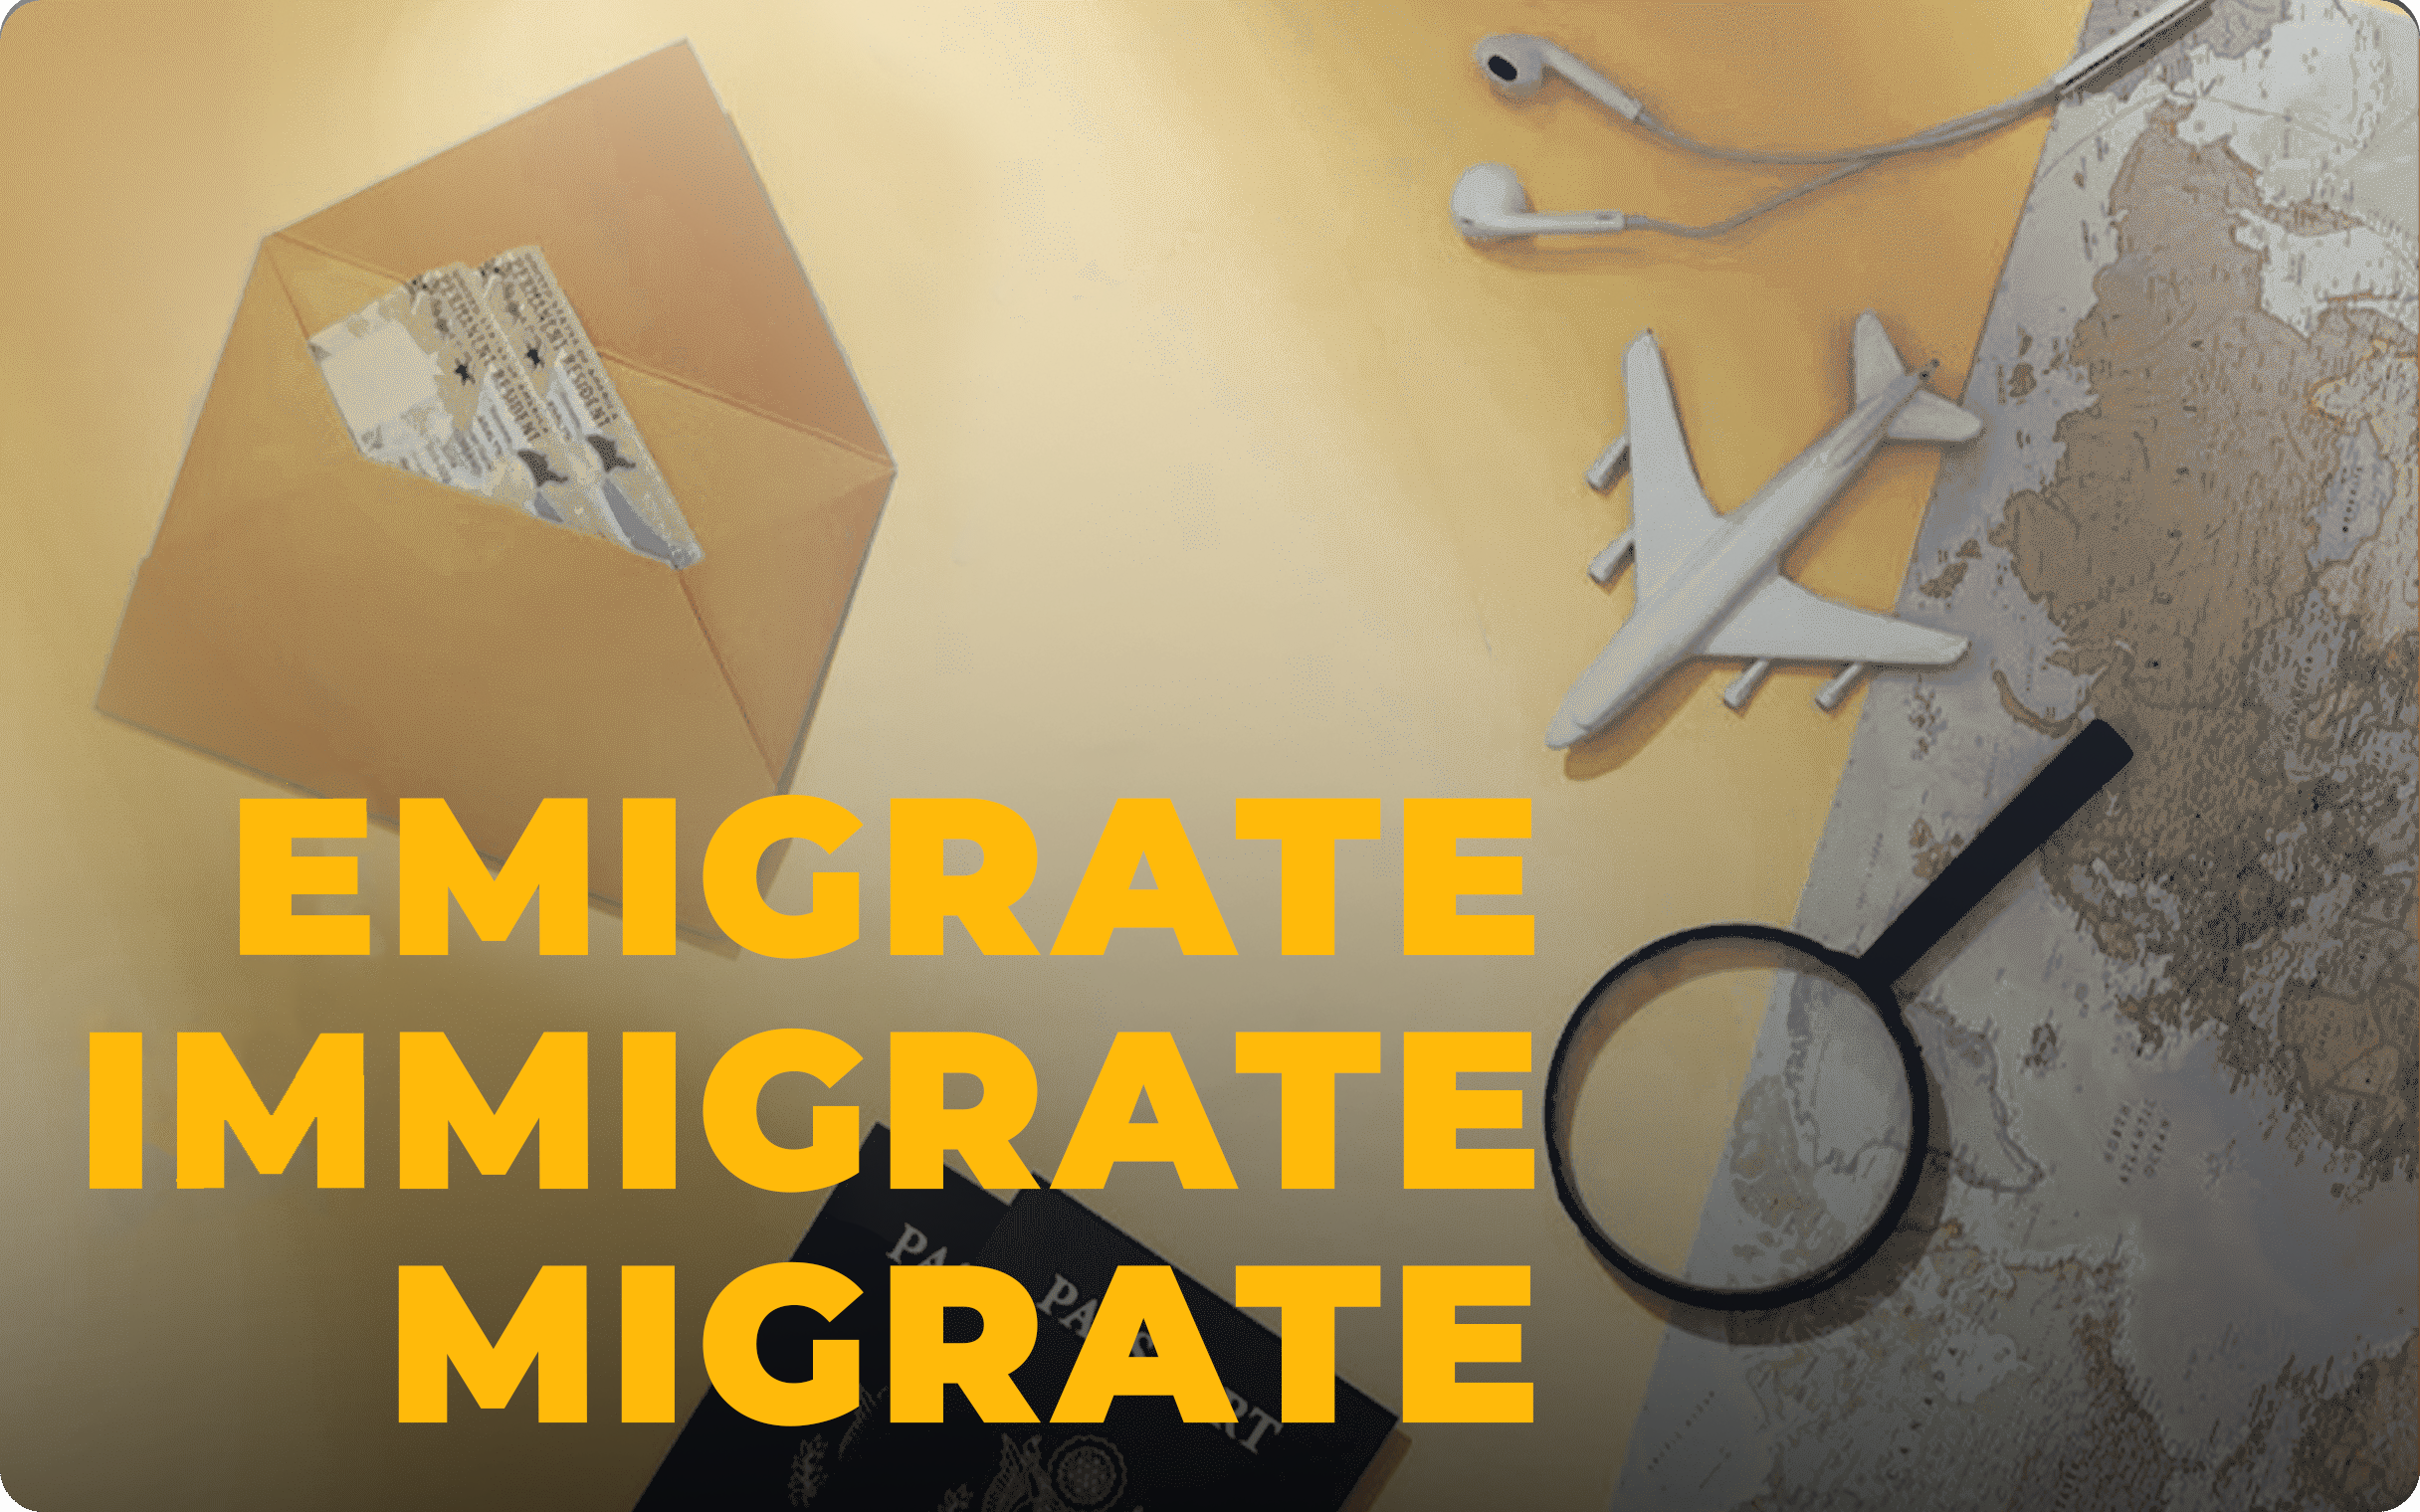 The difference between "emigrate," "immigrate," and "migrate"